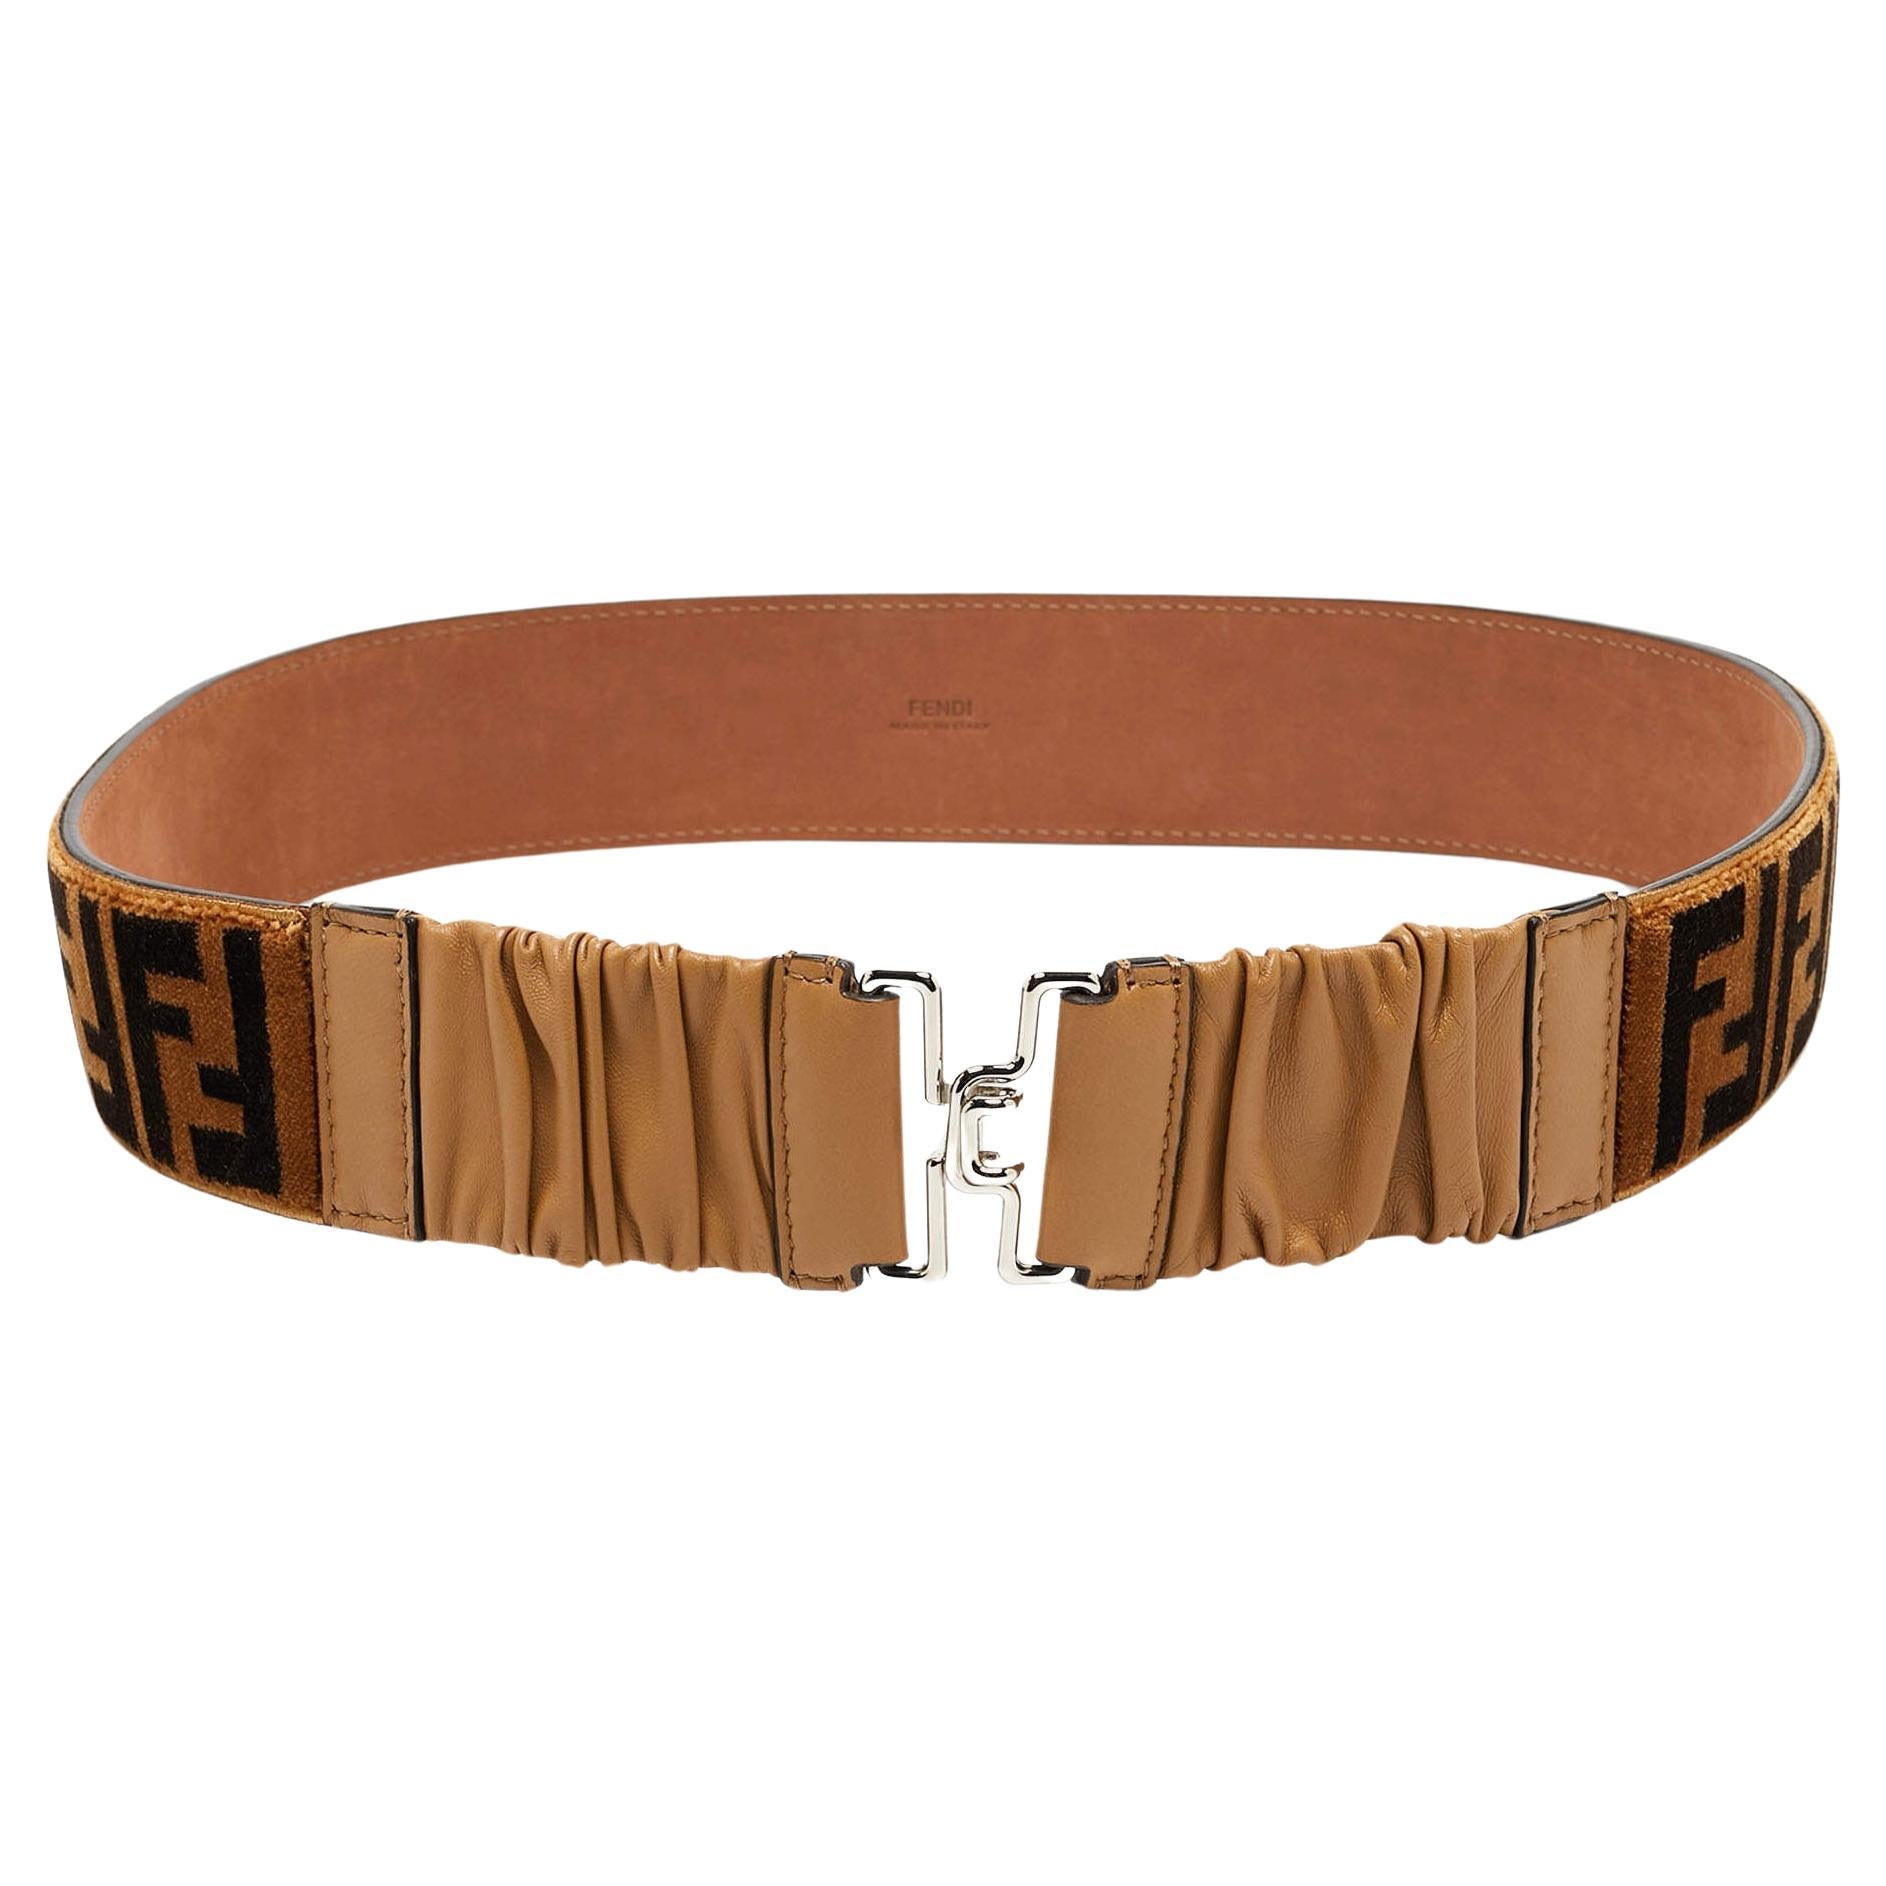 This belt from Fendi has an appealing design. The designer belt has a sturdy buckle that can be easily fastened and unfastened. The belt is perfect to adorn your waist and for making a style statement.

